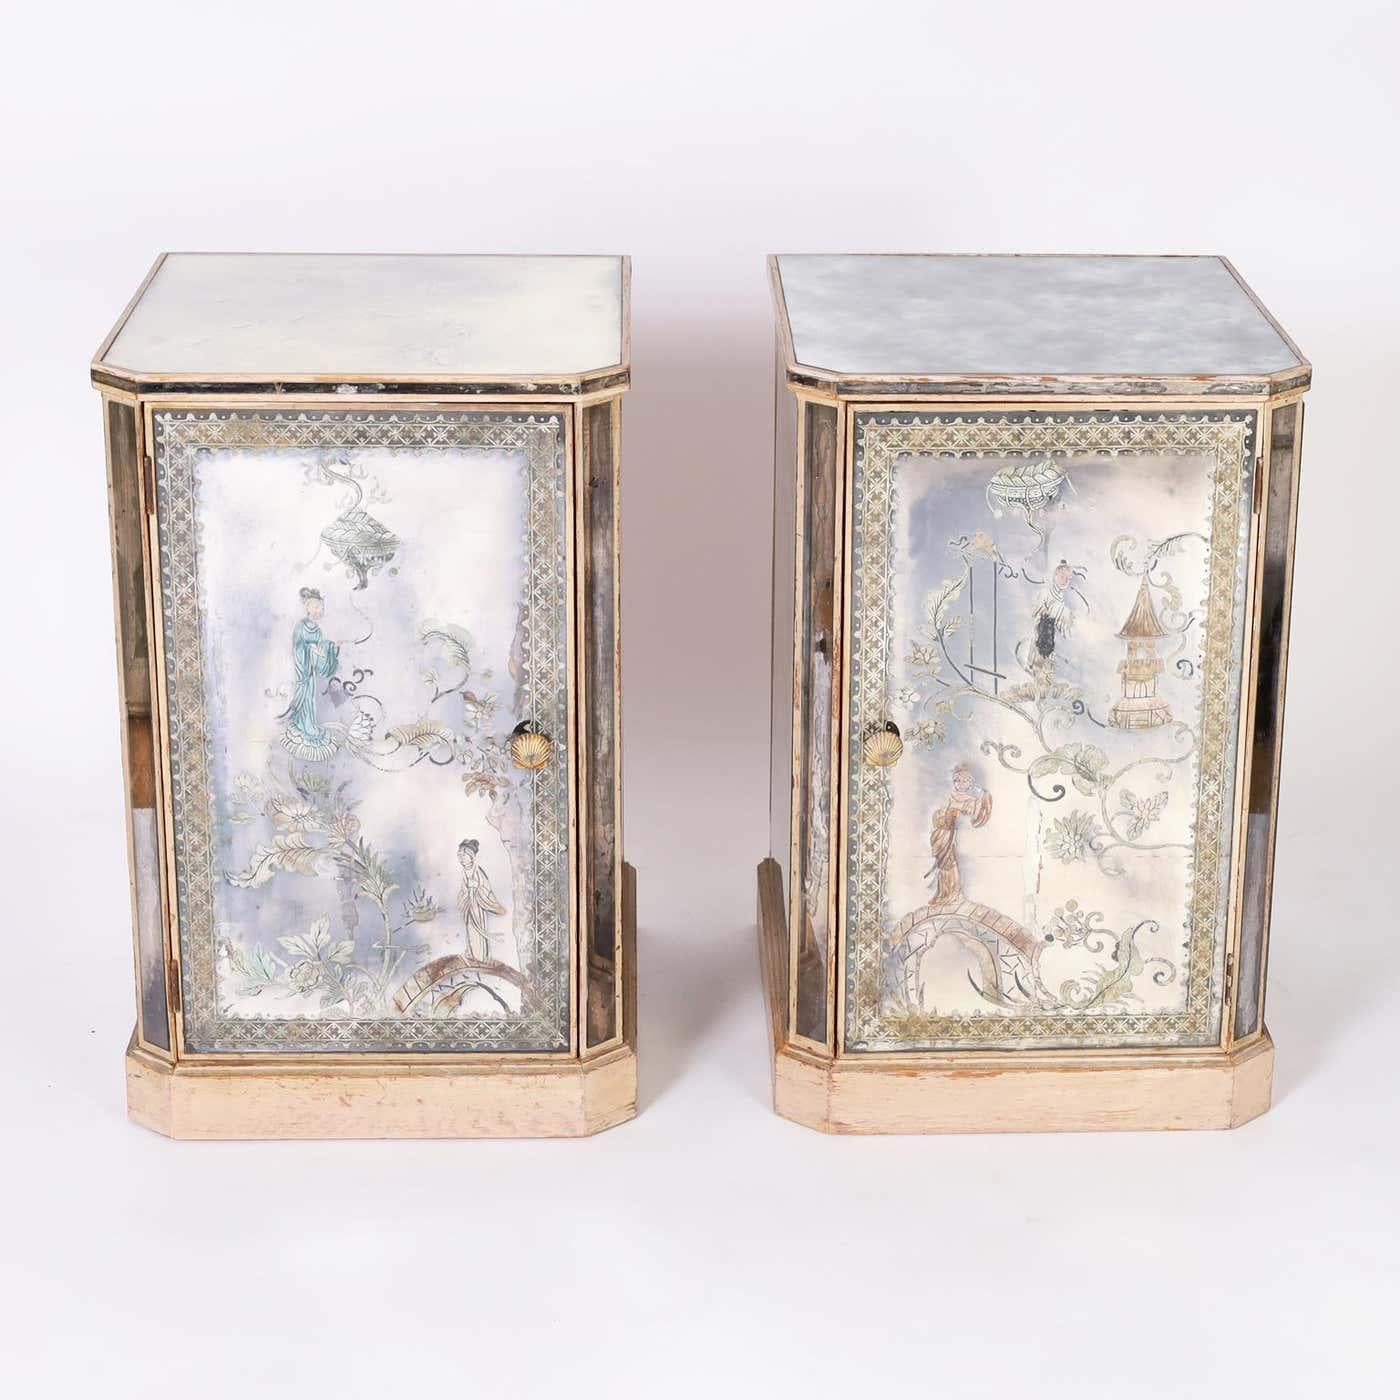 Pair of Italian art deco églomisé nightstands with distressed mirrored panels decorated in a reverse painting technique with chinoiserie designs on the fronts and three sides, one side replaced and one panel has two cracks. The doors have the